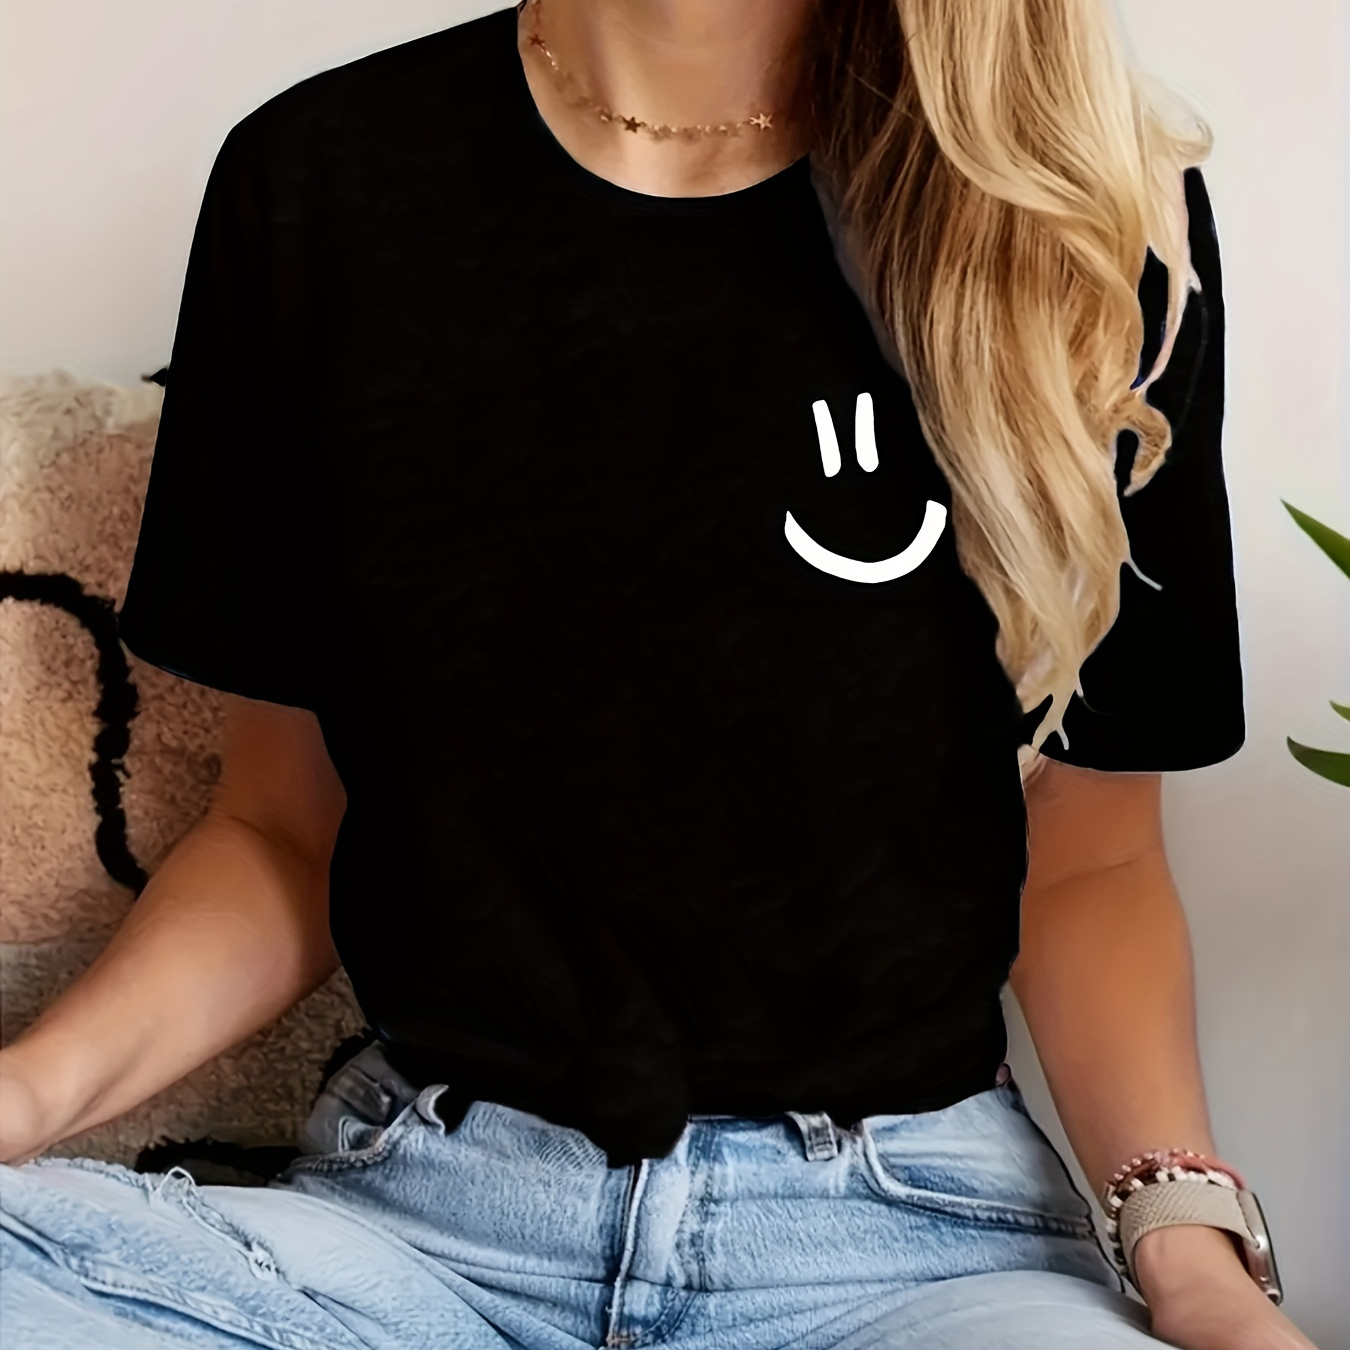 

1pc, Women's Casual T-shirt, Smile Graphic Relaxed Fit, Sporty Lounge Top, Fashion, Versatile Round Neck Tee